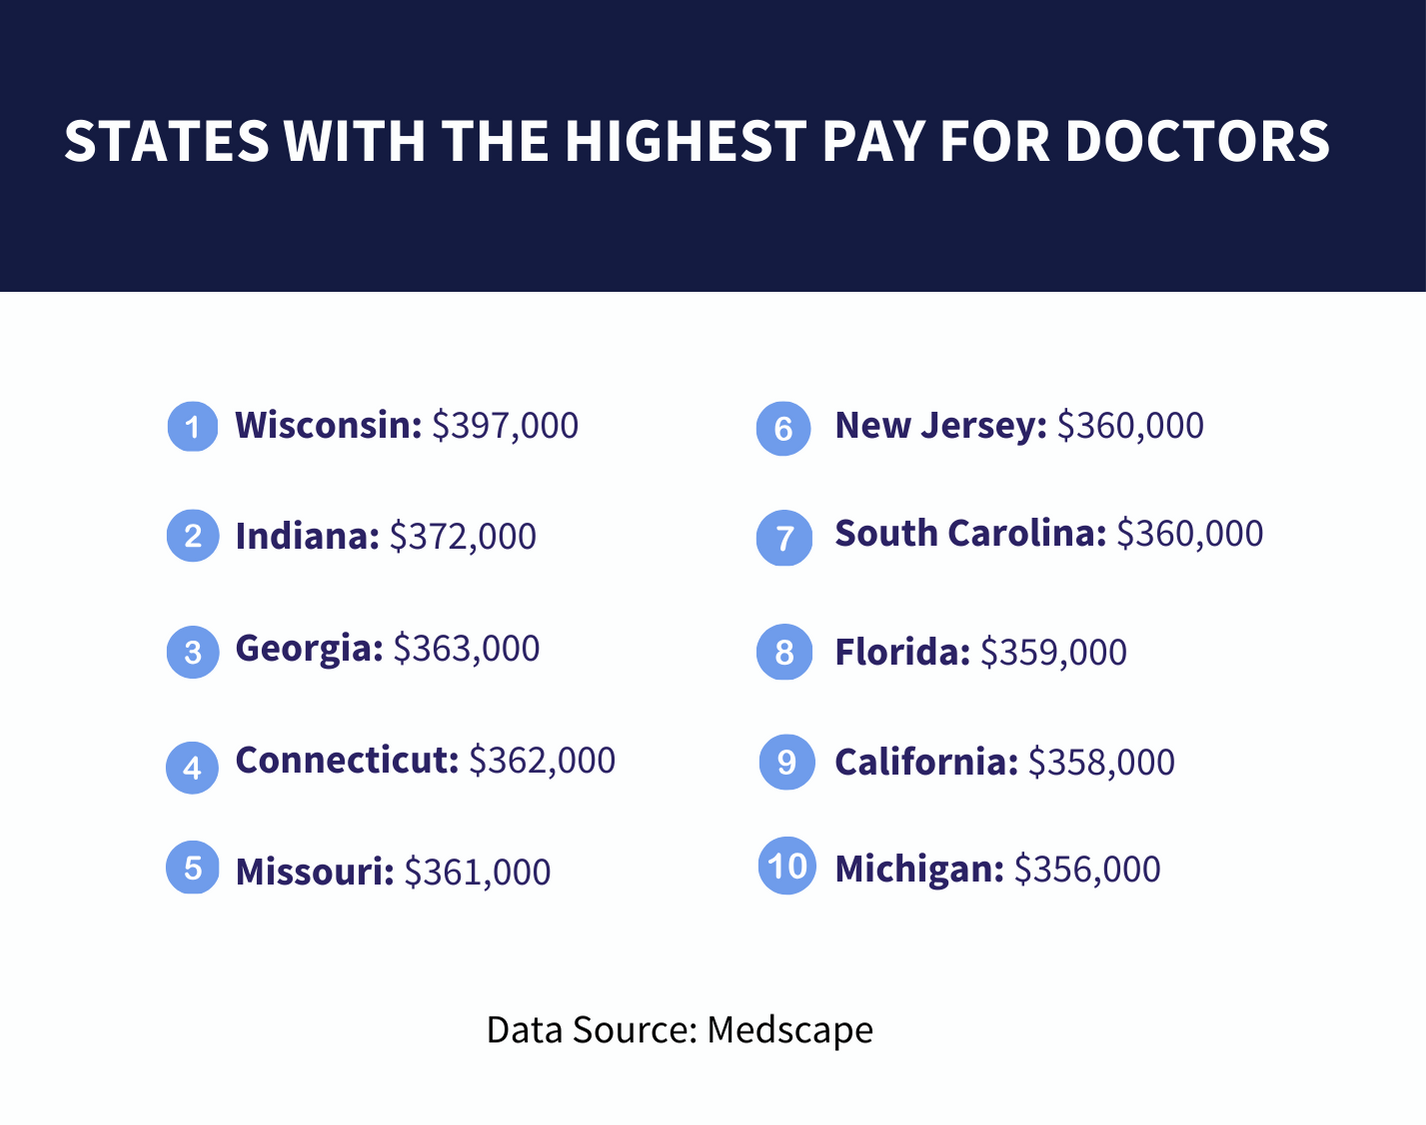 States with the Highest Pay for Doctors